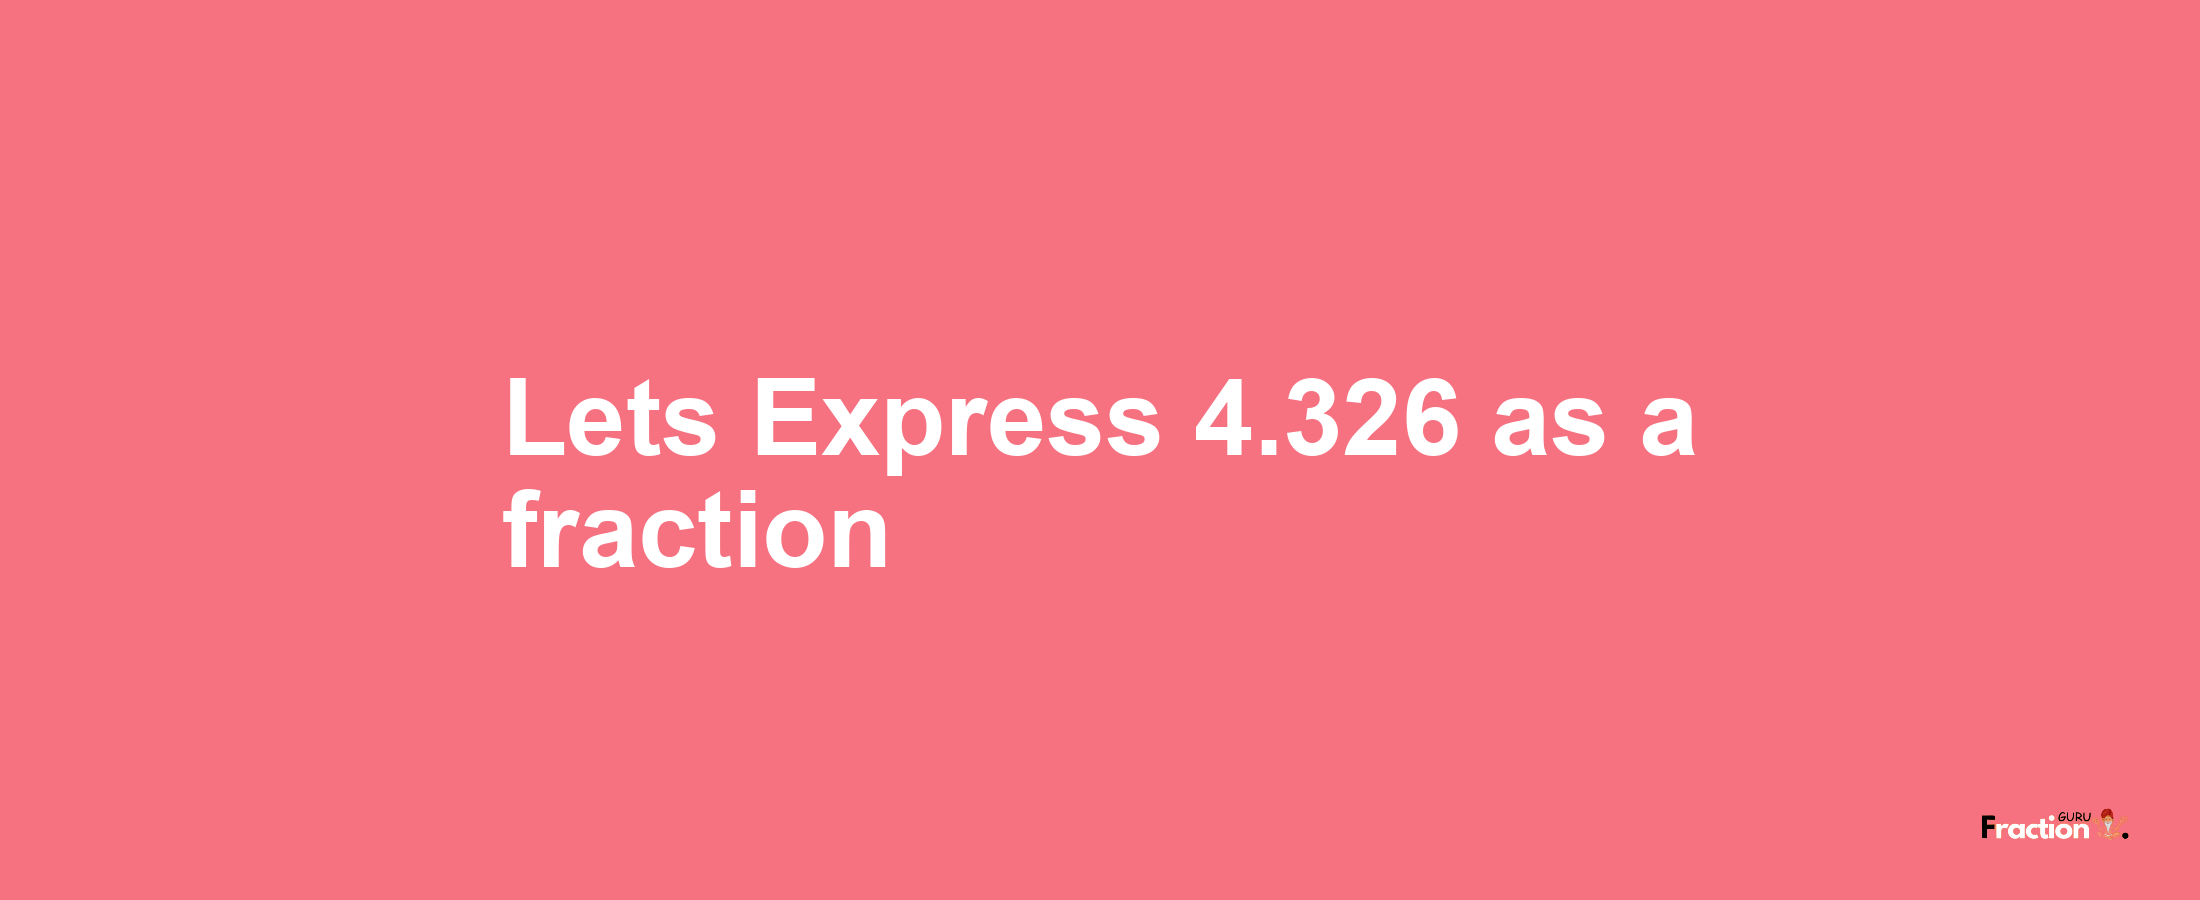 Lets Express 4.326 as afraction